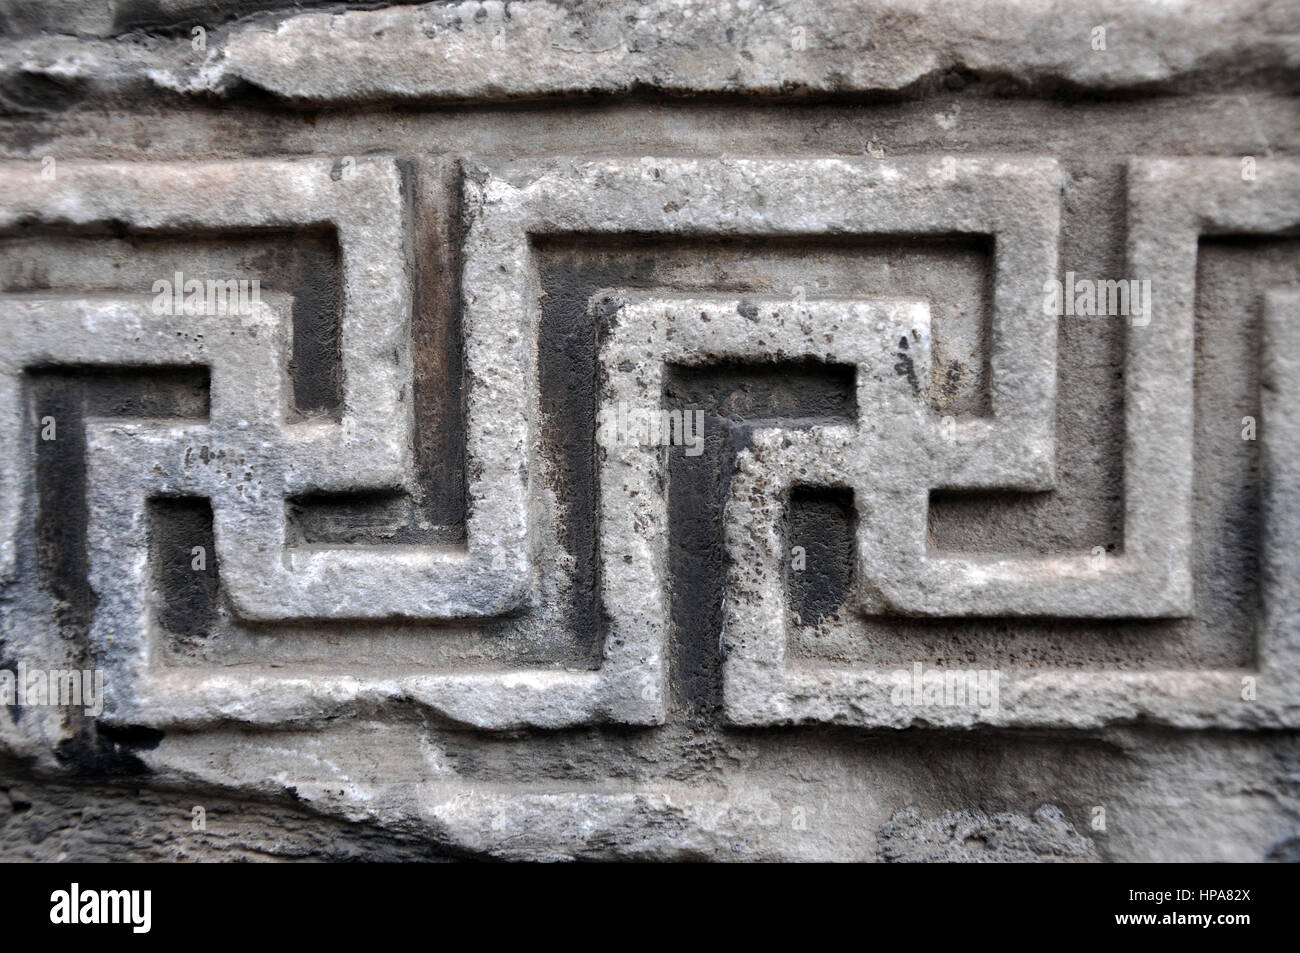 Ancient Roman architectural details. Carved stone Byzantine motif close-up Stock Photo